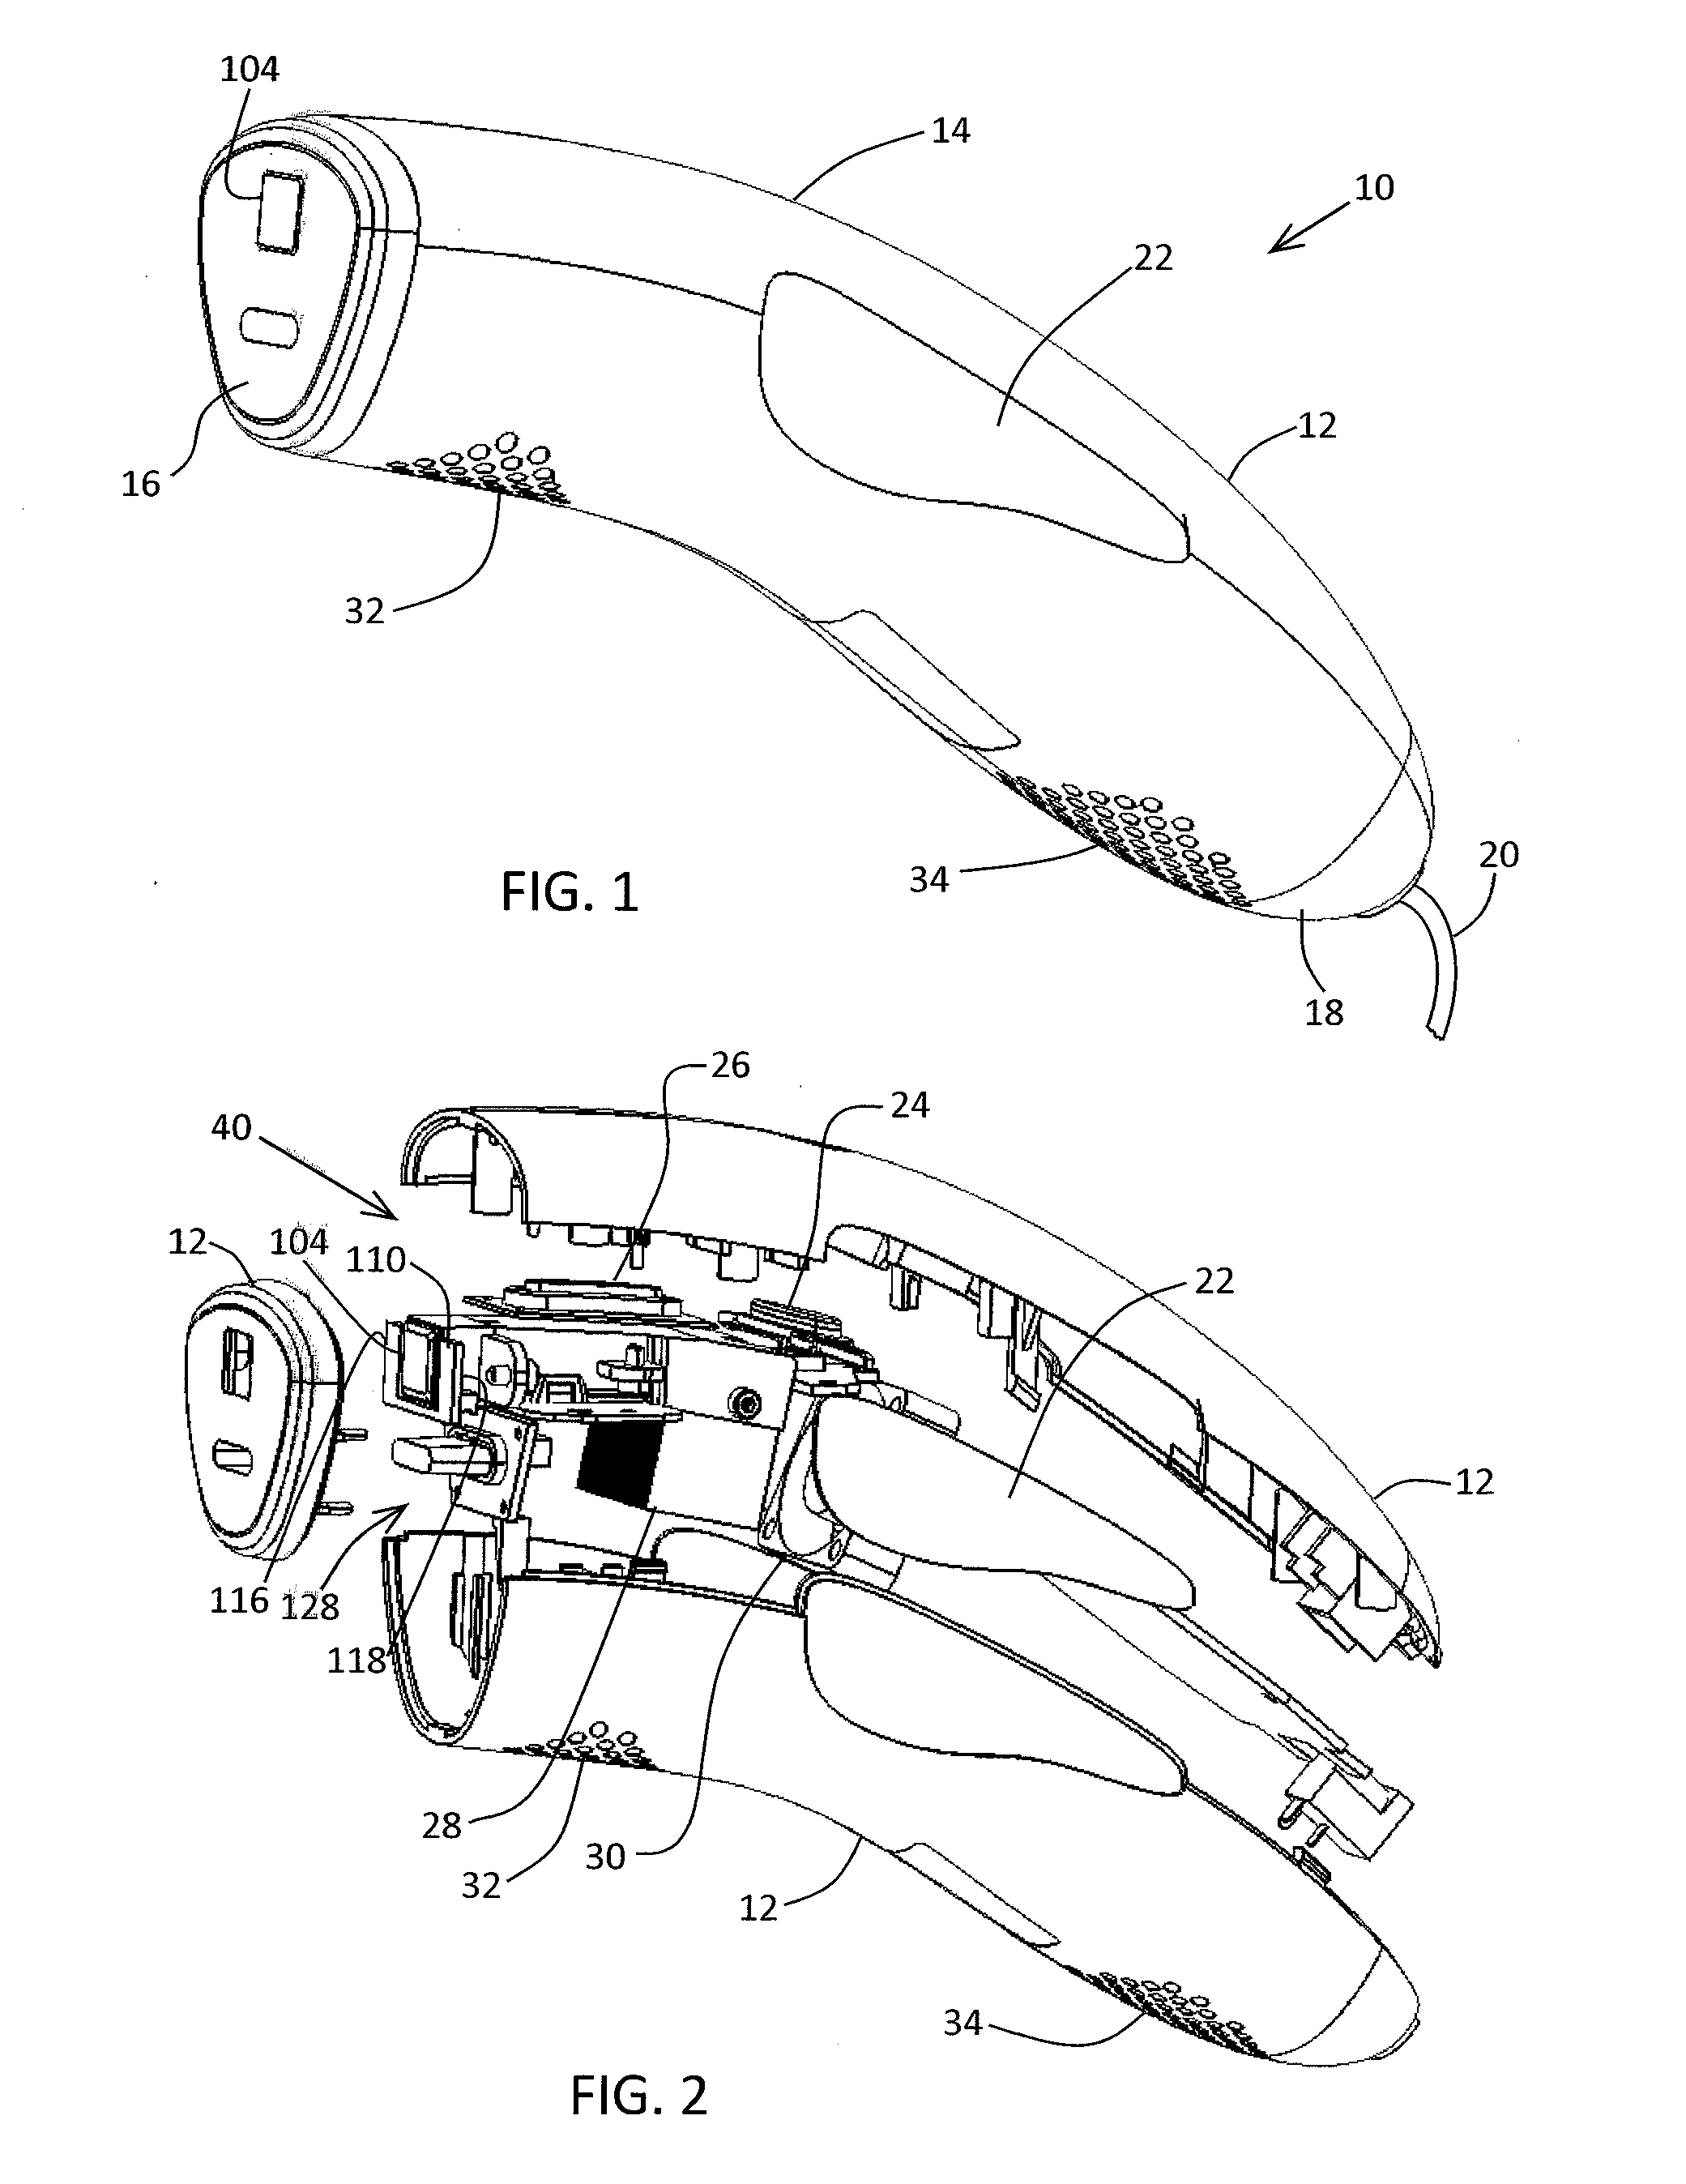 Single-emitter diode based light homogenizing apparatus and a hair removal device employing the same